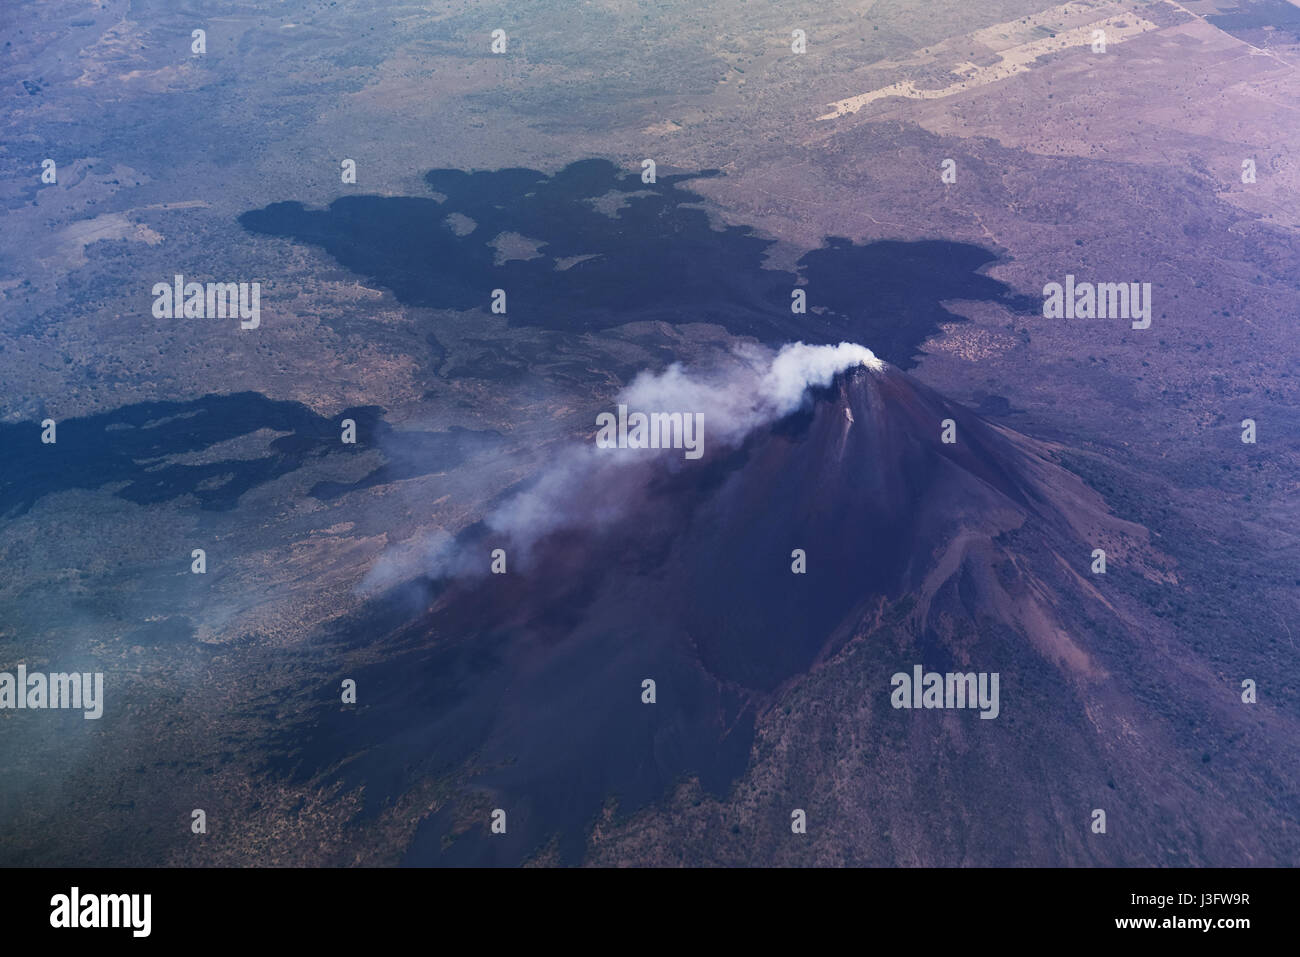 Volcano with smoke in crater aerial view. Momotombo volcano in nicaragua landscape Stock Photo